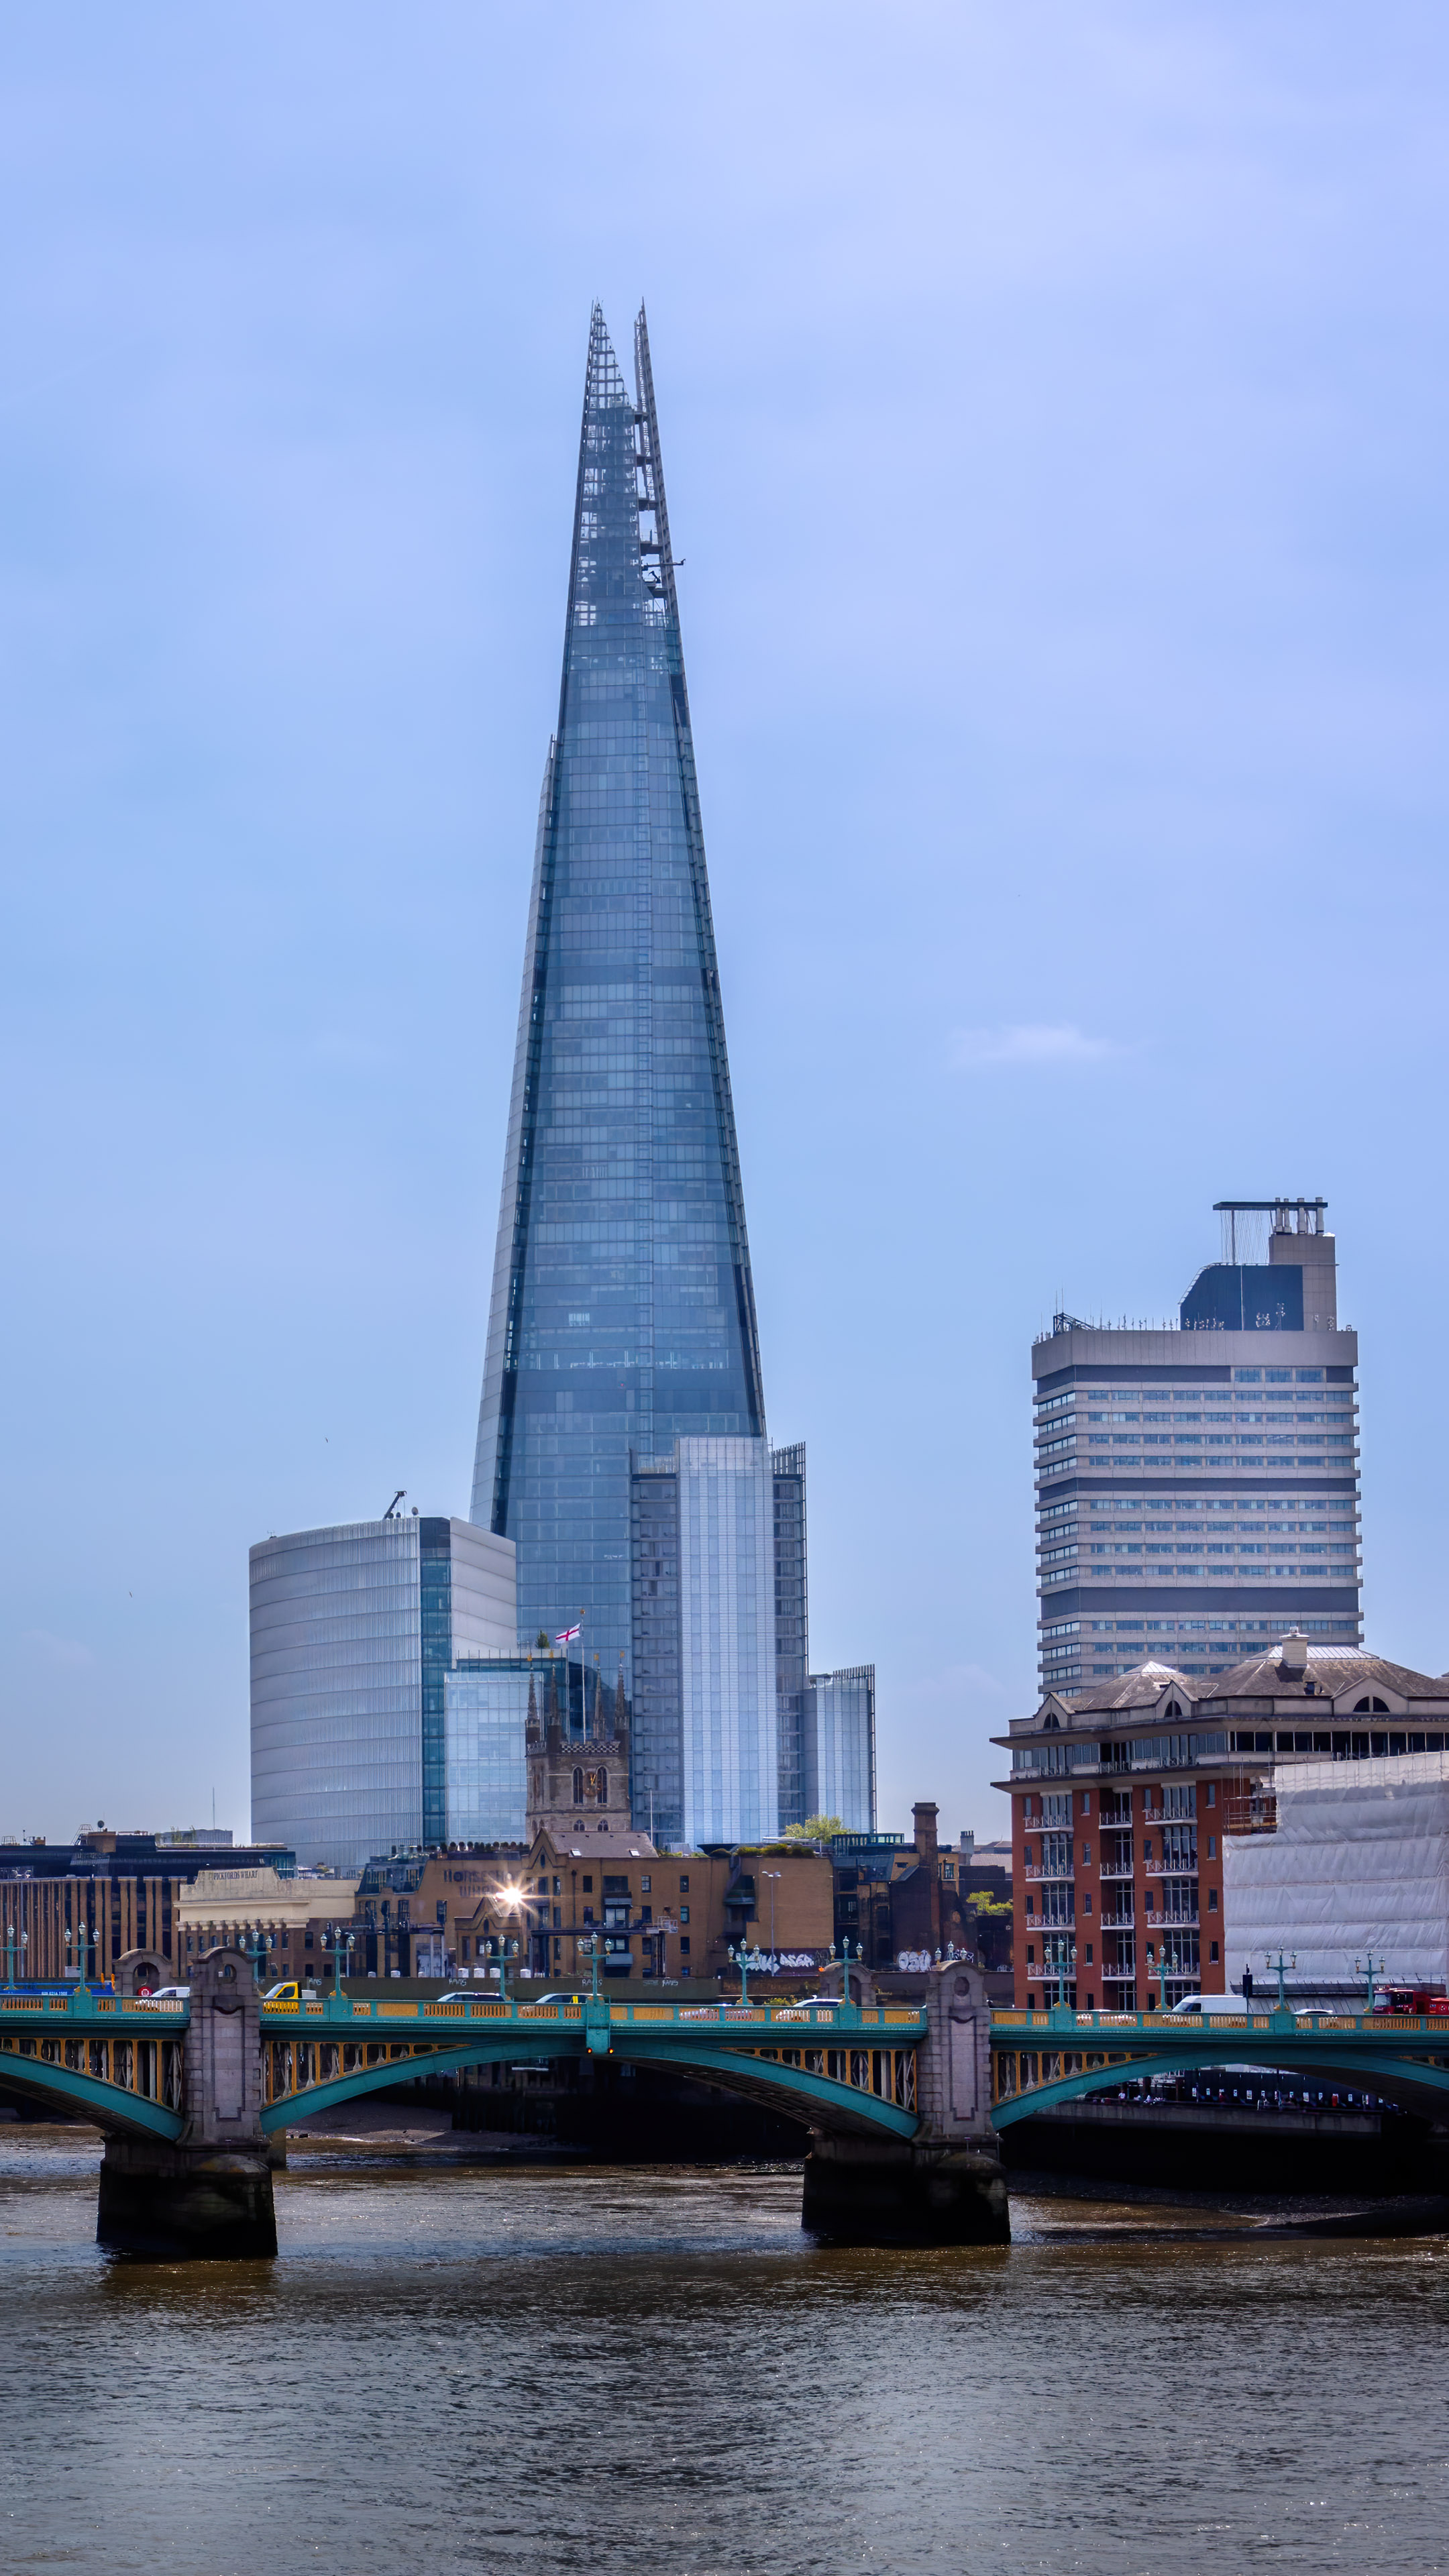 Enjoy the stunning London skyline featuring the Shard and Gherkin buildings with this wallpaper.